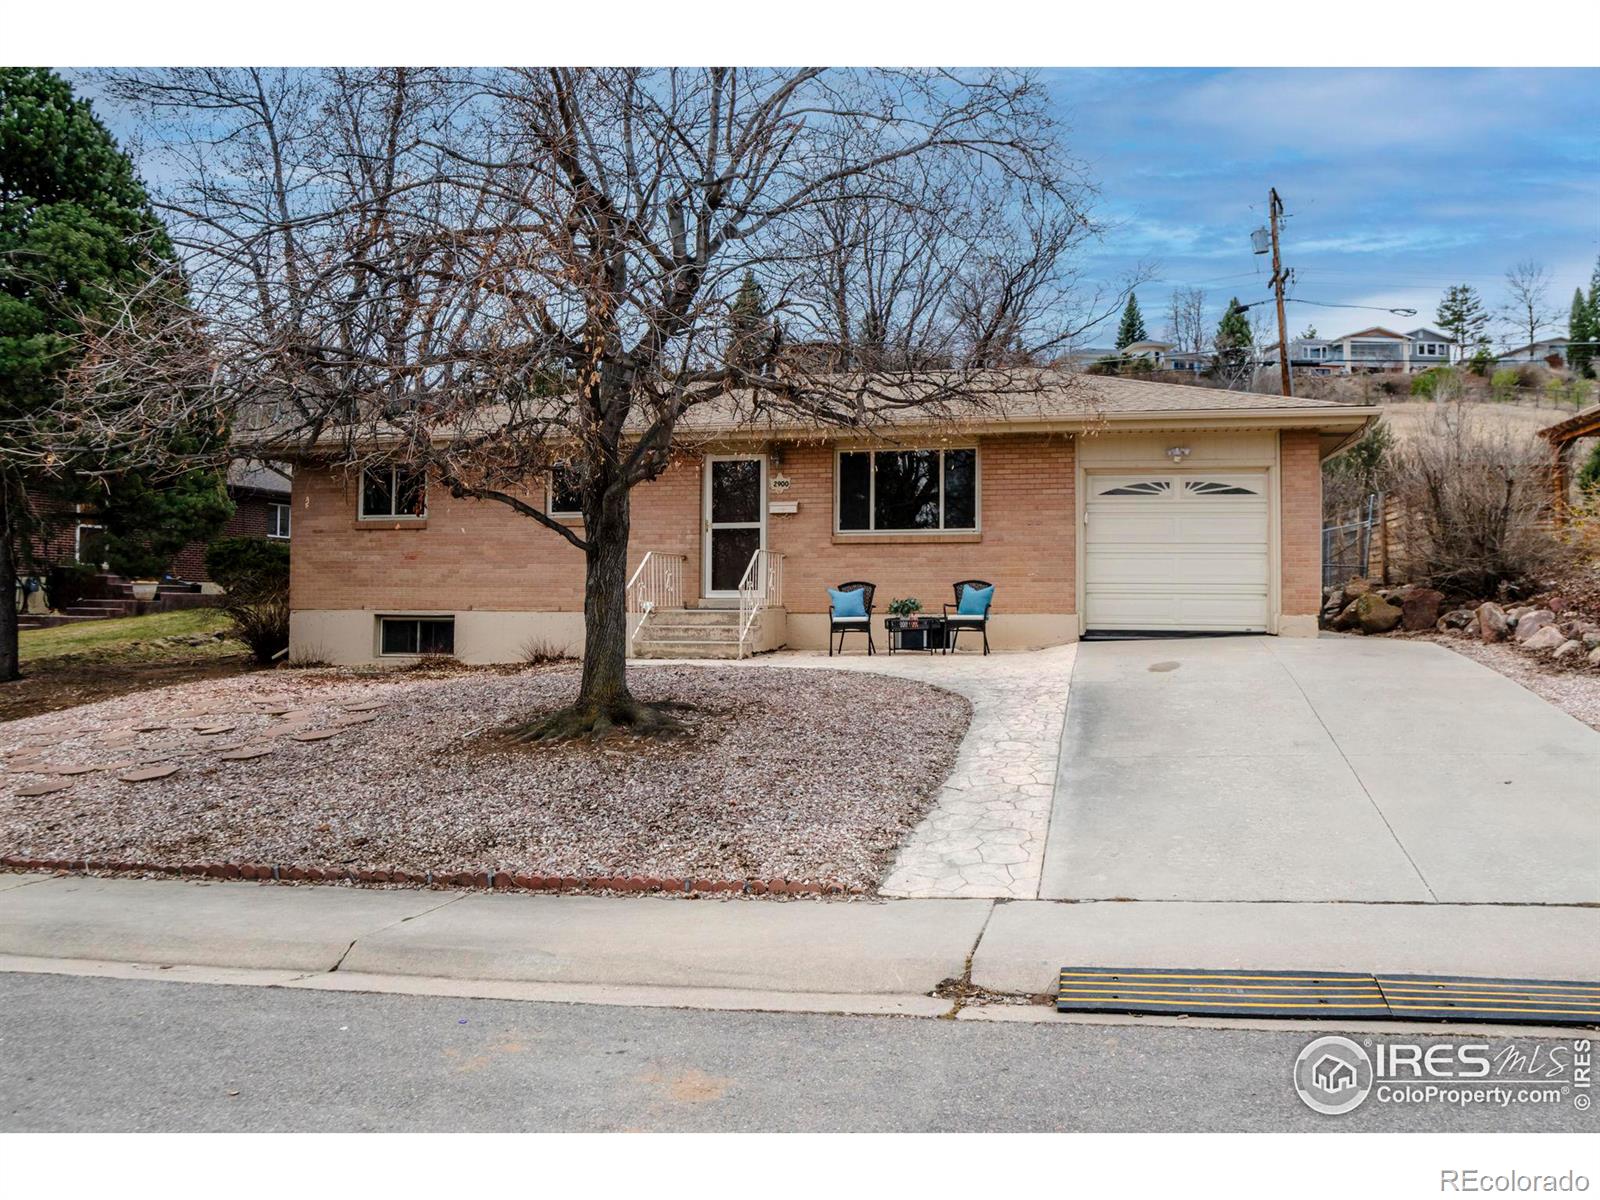 2900  dover drive, Boulder sold home. Closed on 2024-04-29 for $886,000.